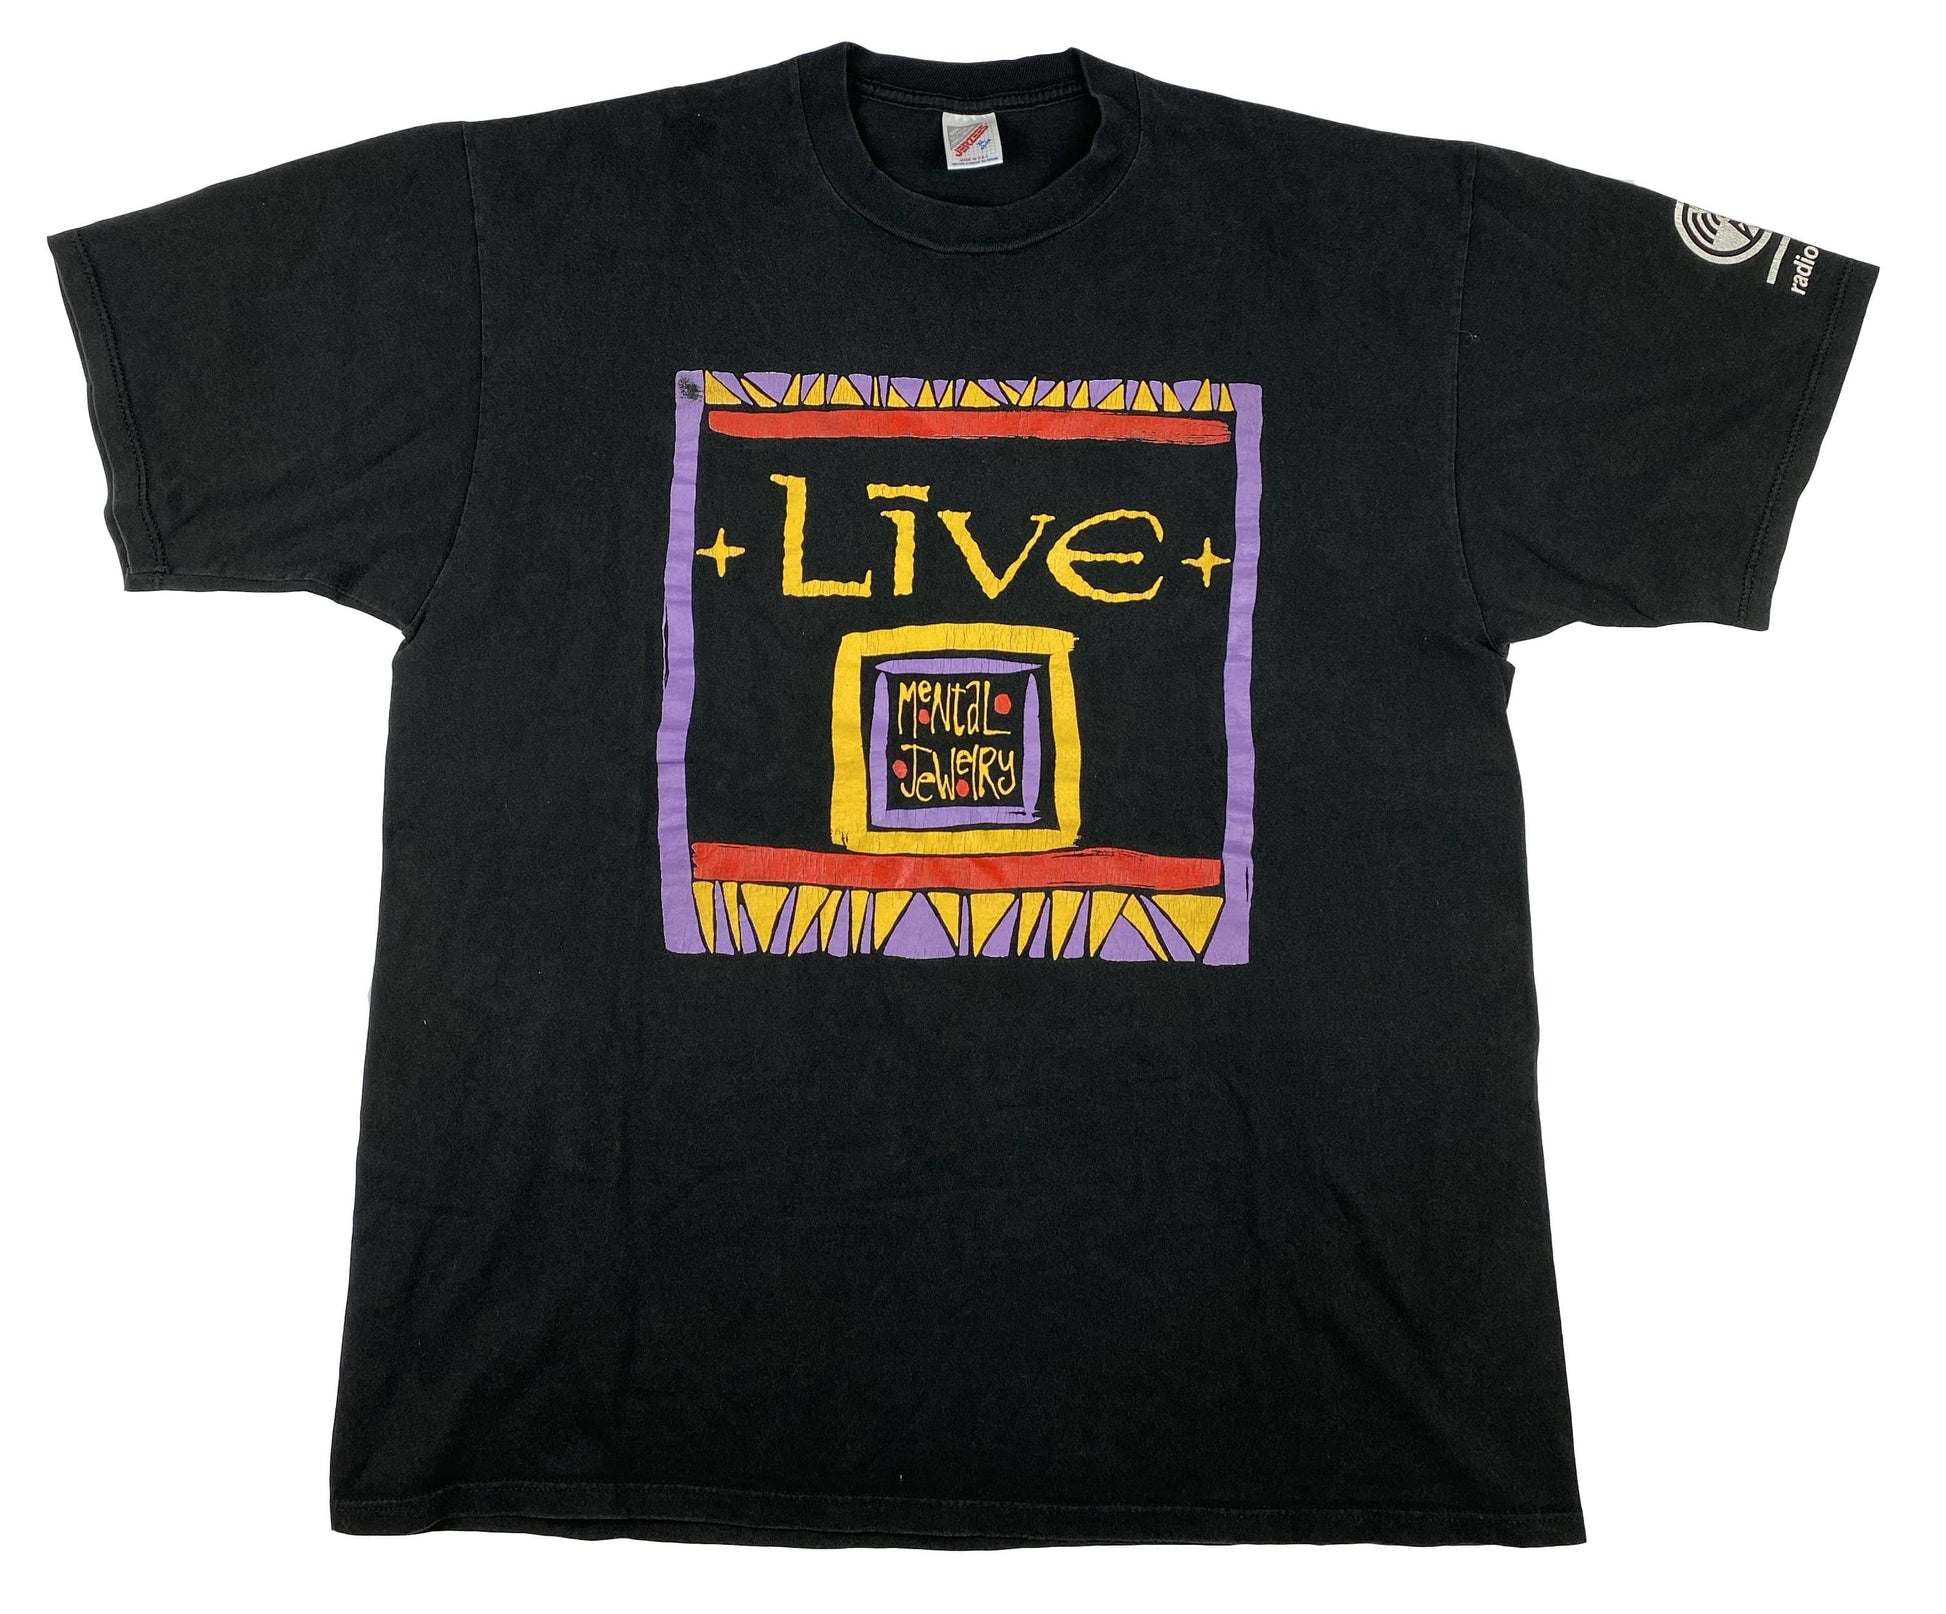 Vintage Band T-Shirt 1991 Live "Mental Jewelry"  This was the first studio album from the band. Many of the songs are based on the writings of Indian philosopher Jiddu Krishnamurti. Such a 29 years old piece of history.